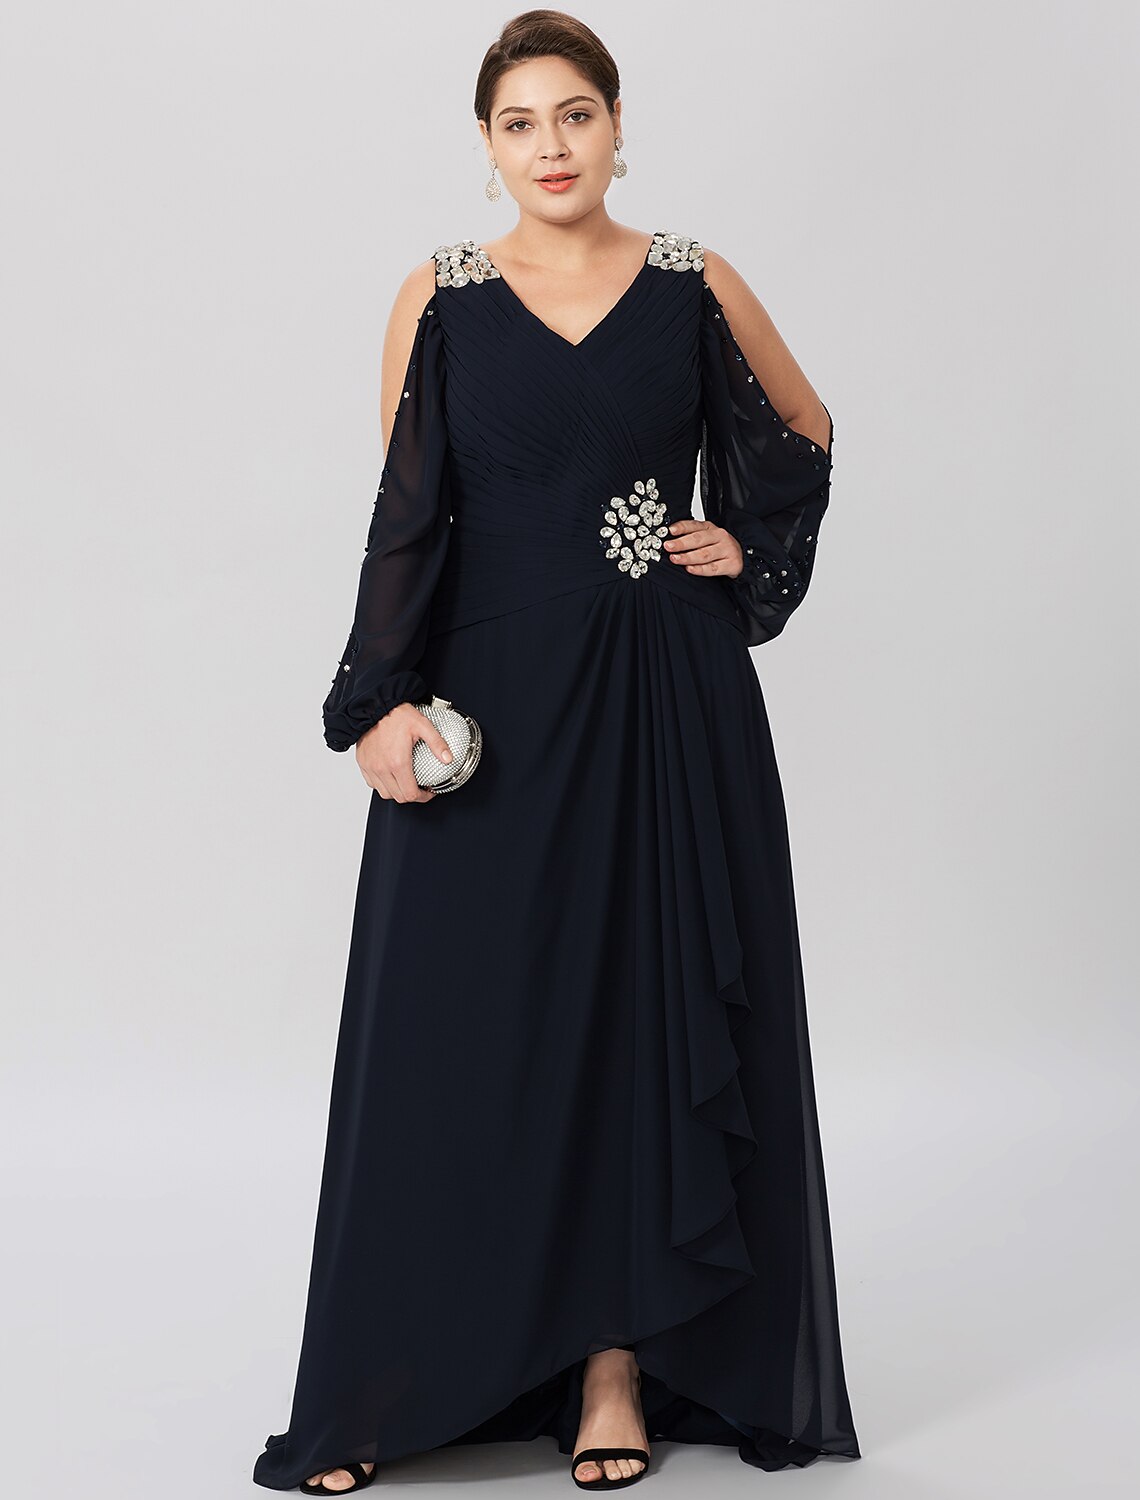 Sheath / Column Mother of the Bride Dress Plus Size Elegant High Low V Neck Asymmetrical Chiffon Stretch Satin Long Sleeve with Criss Cross Crystals